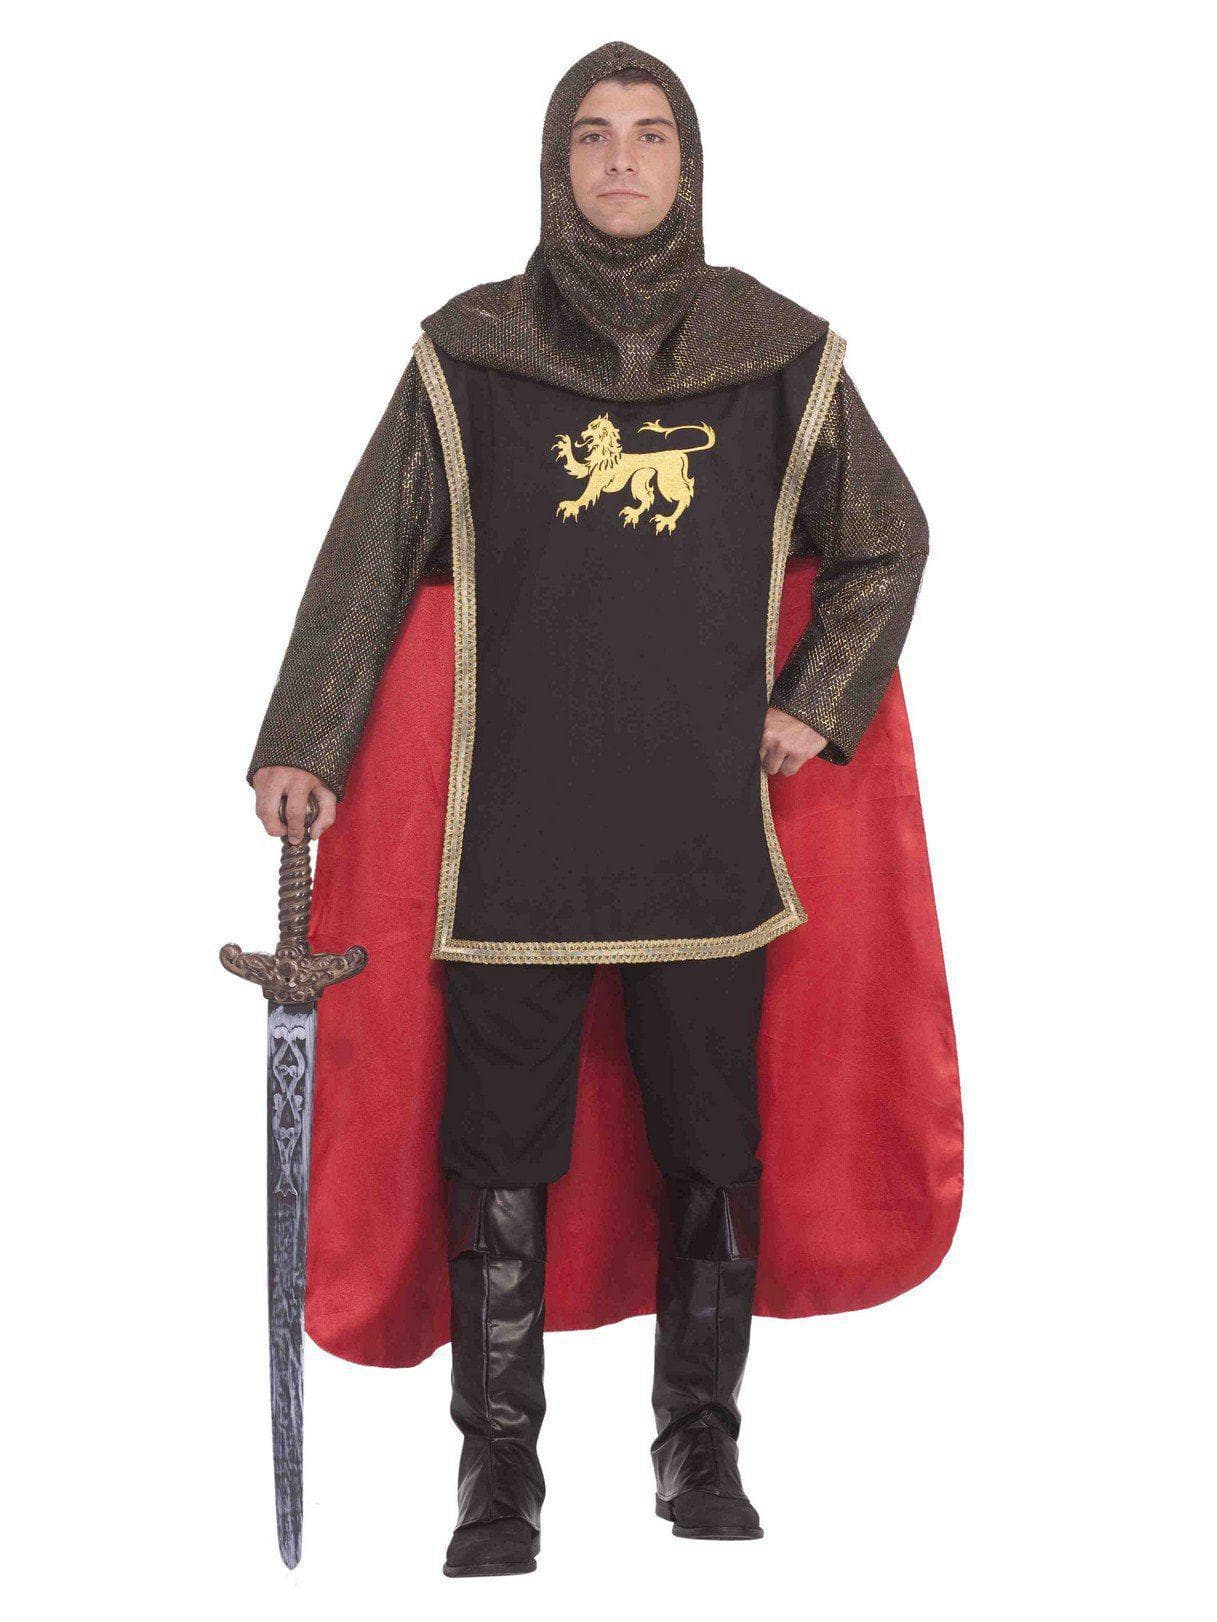 Adult Medieval Knight Costume - costumes.com